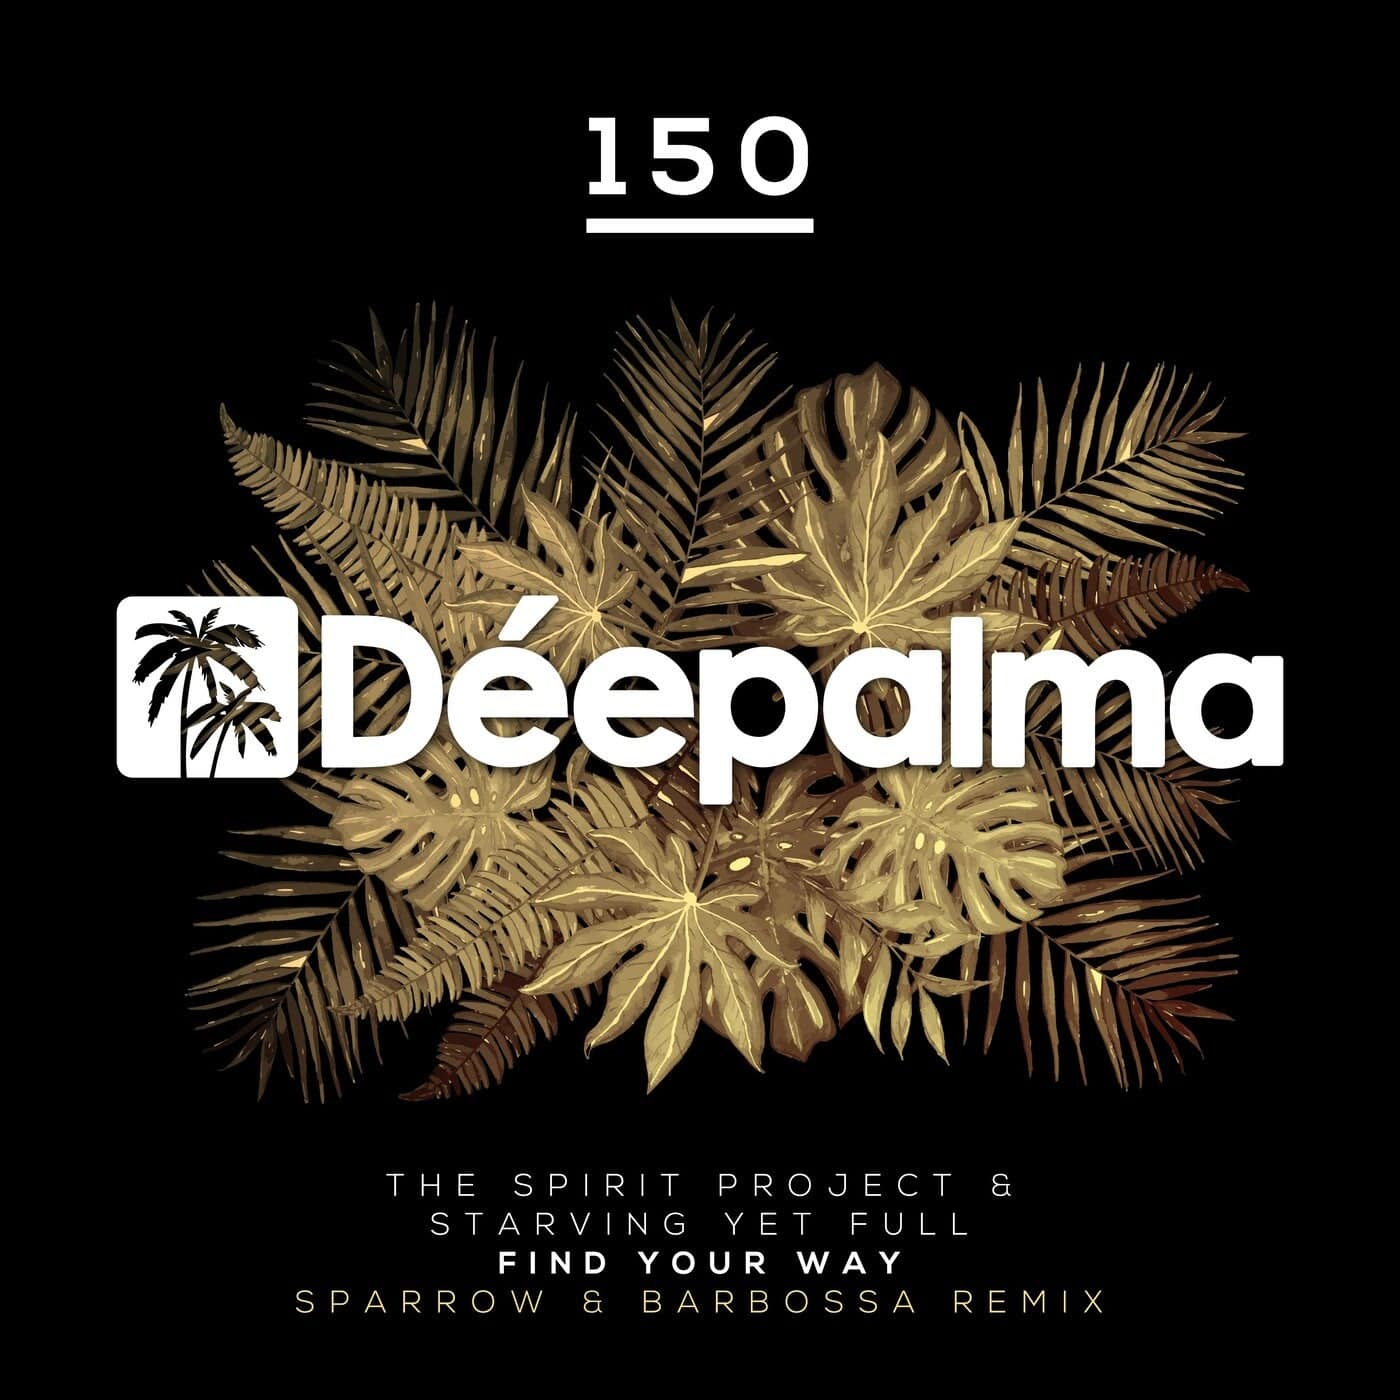 image cover: Starving Yet Full, The Spirit Project - Find Your Way (Sparrow & Barbossa Remix) / DPLM150R